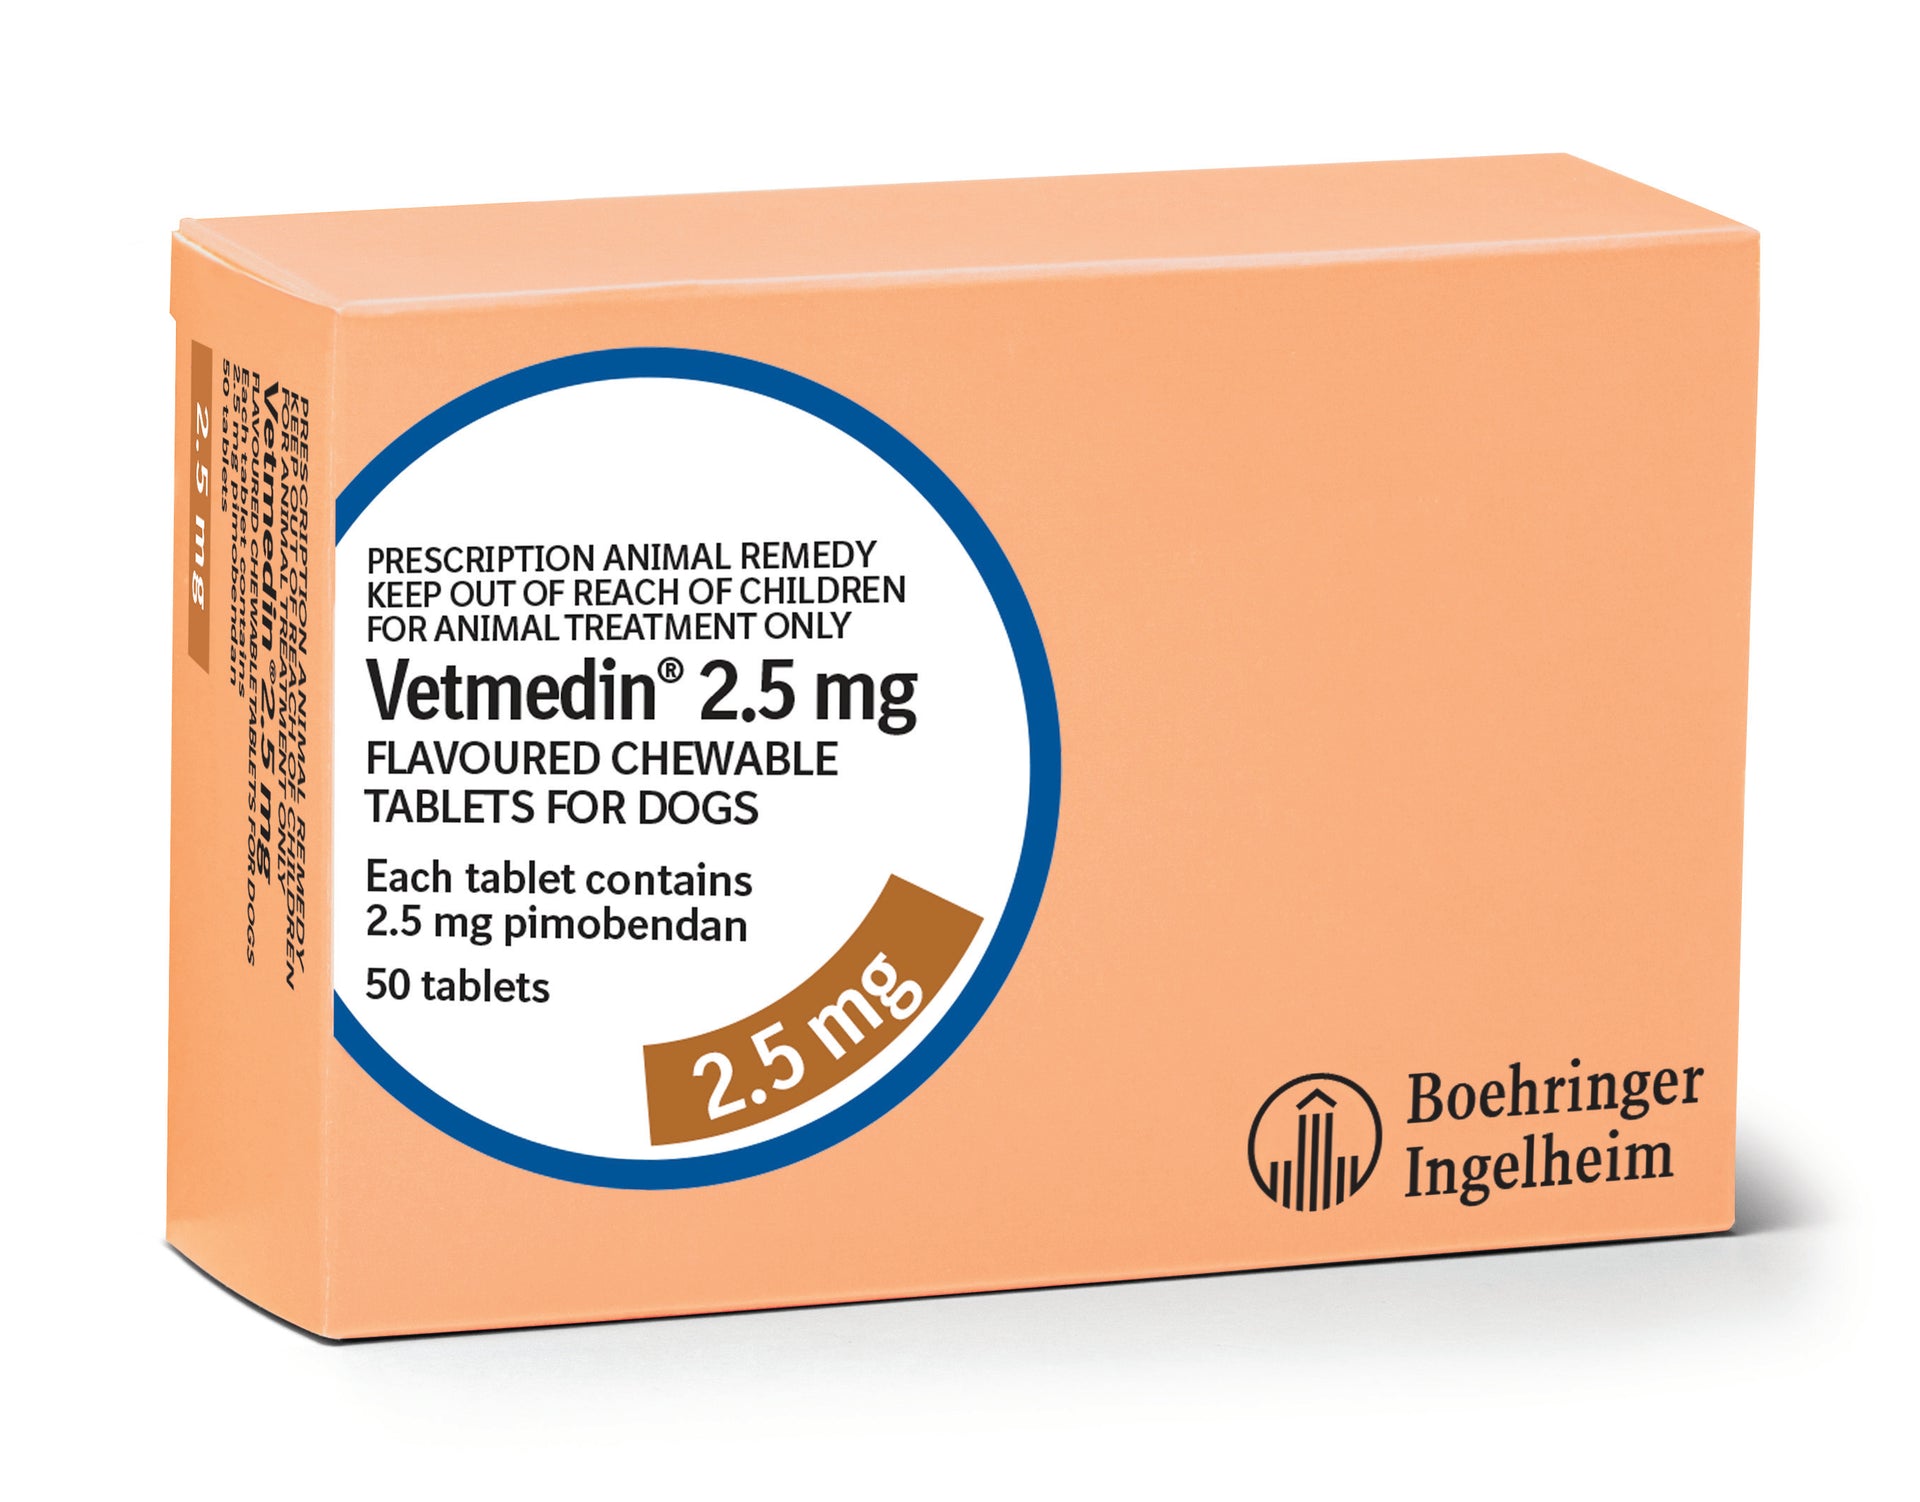 Vetmedin 2.5mg Chewable Tablets for Dogs 50 Tablets